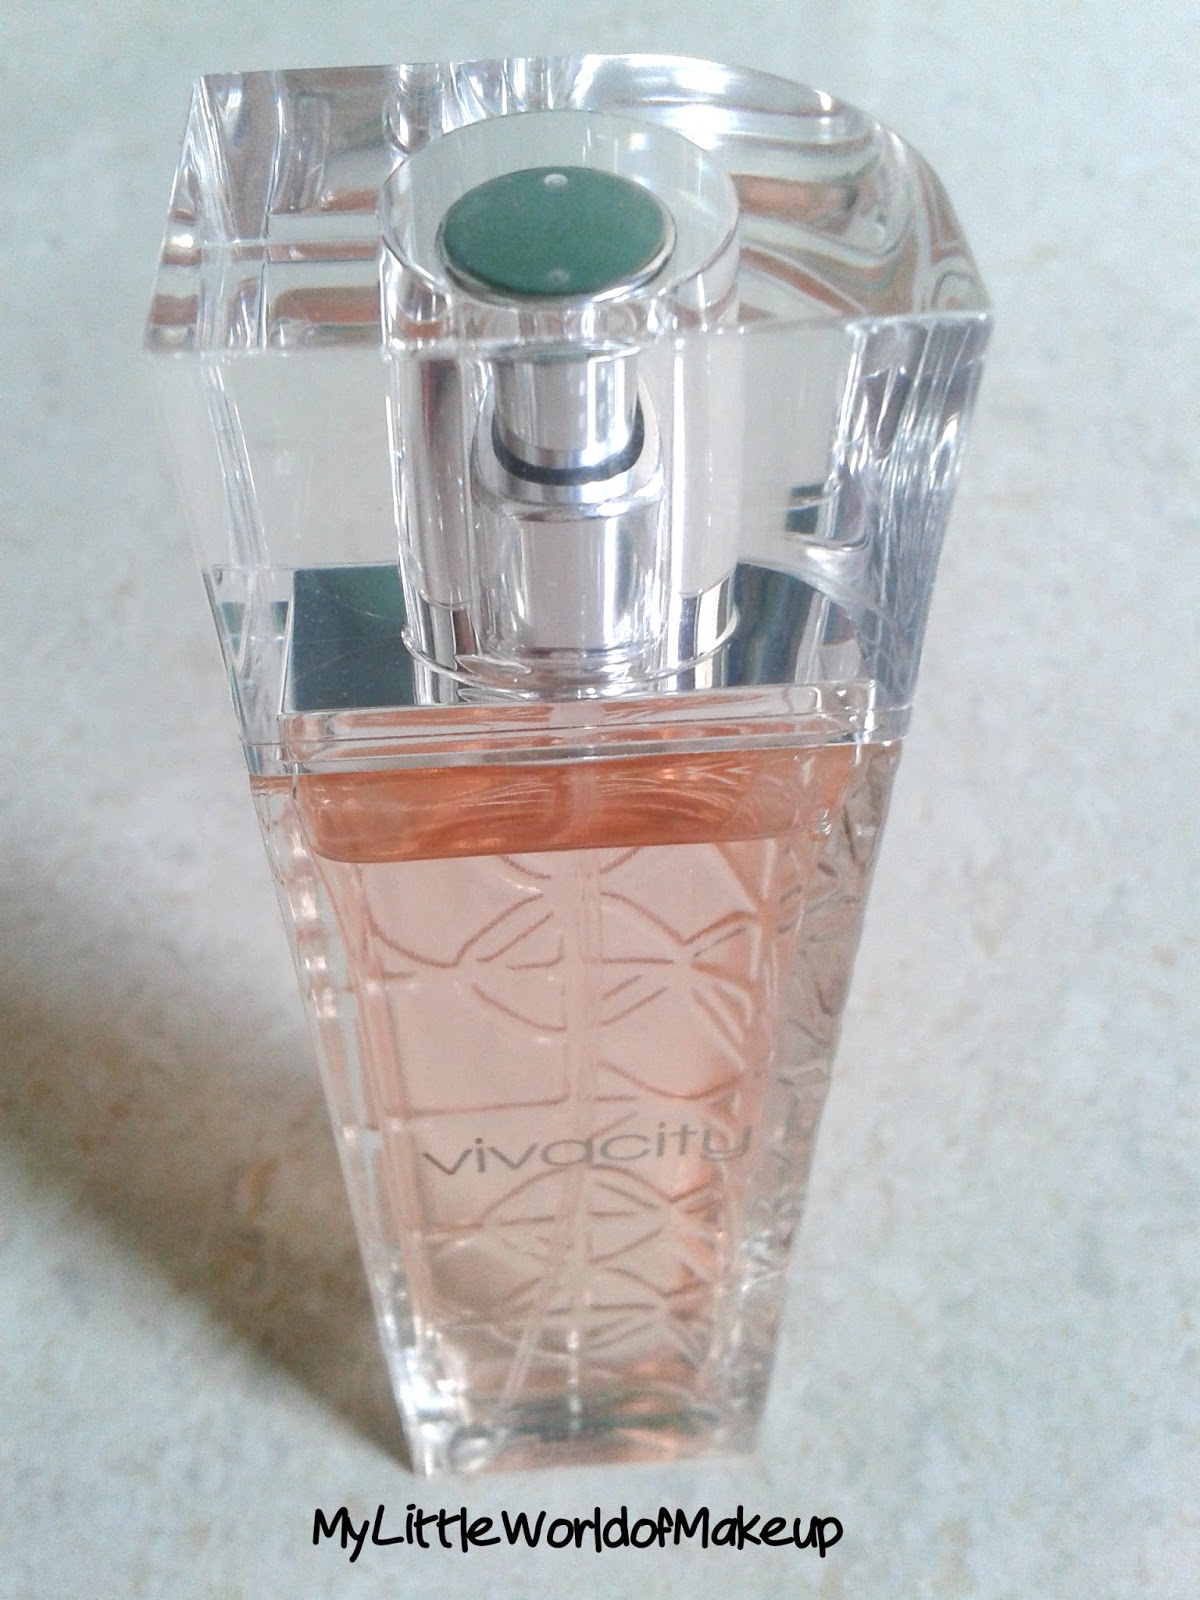 Eclat Mademoiselle and Lui EDT Perfumes Review